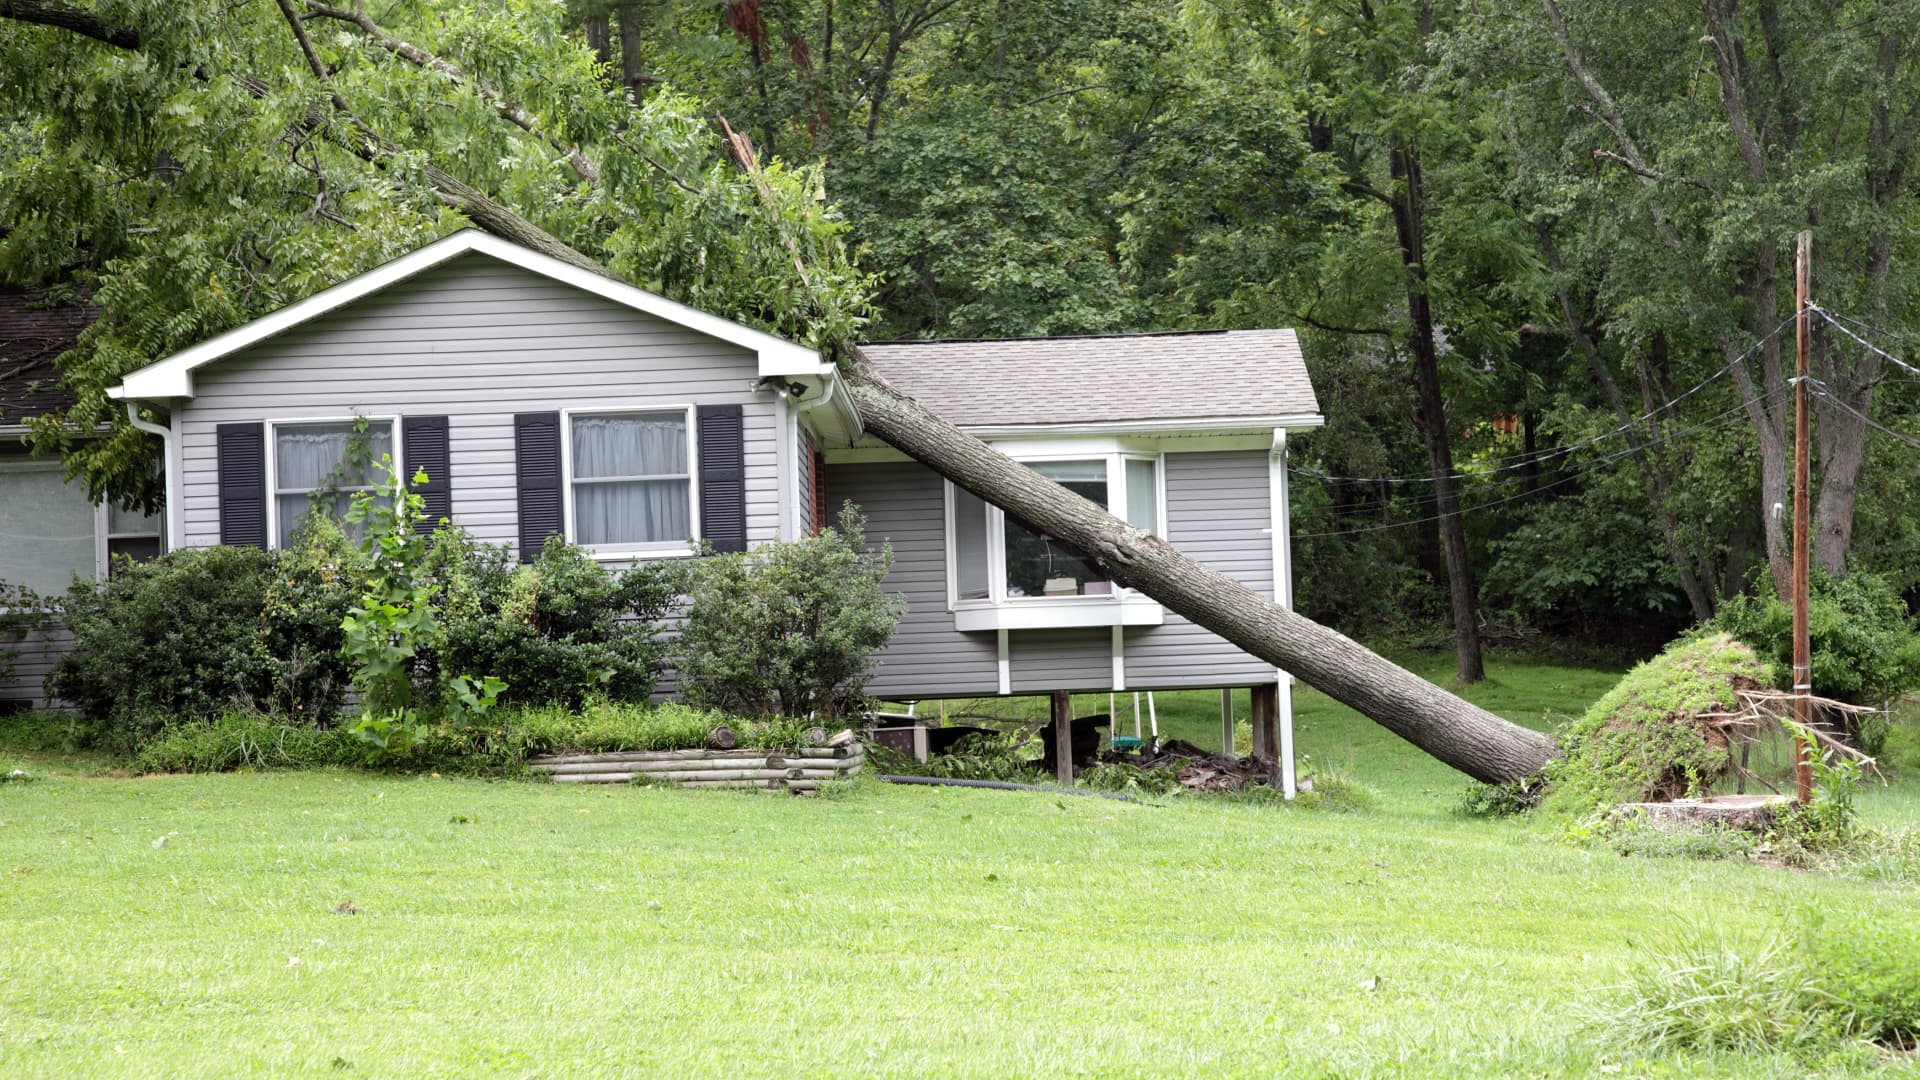 5 Surprising Things Your Home Insurance Covers